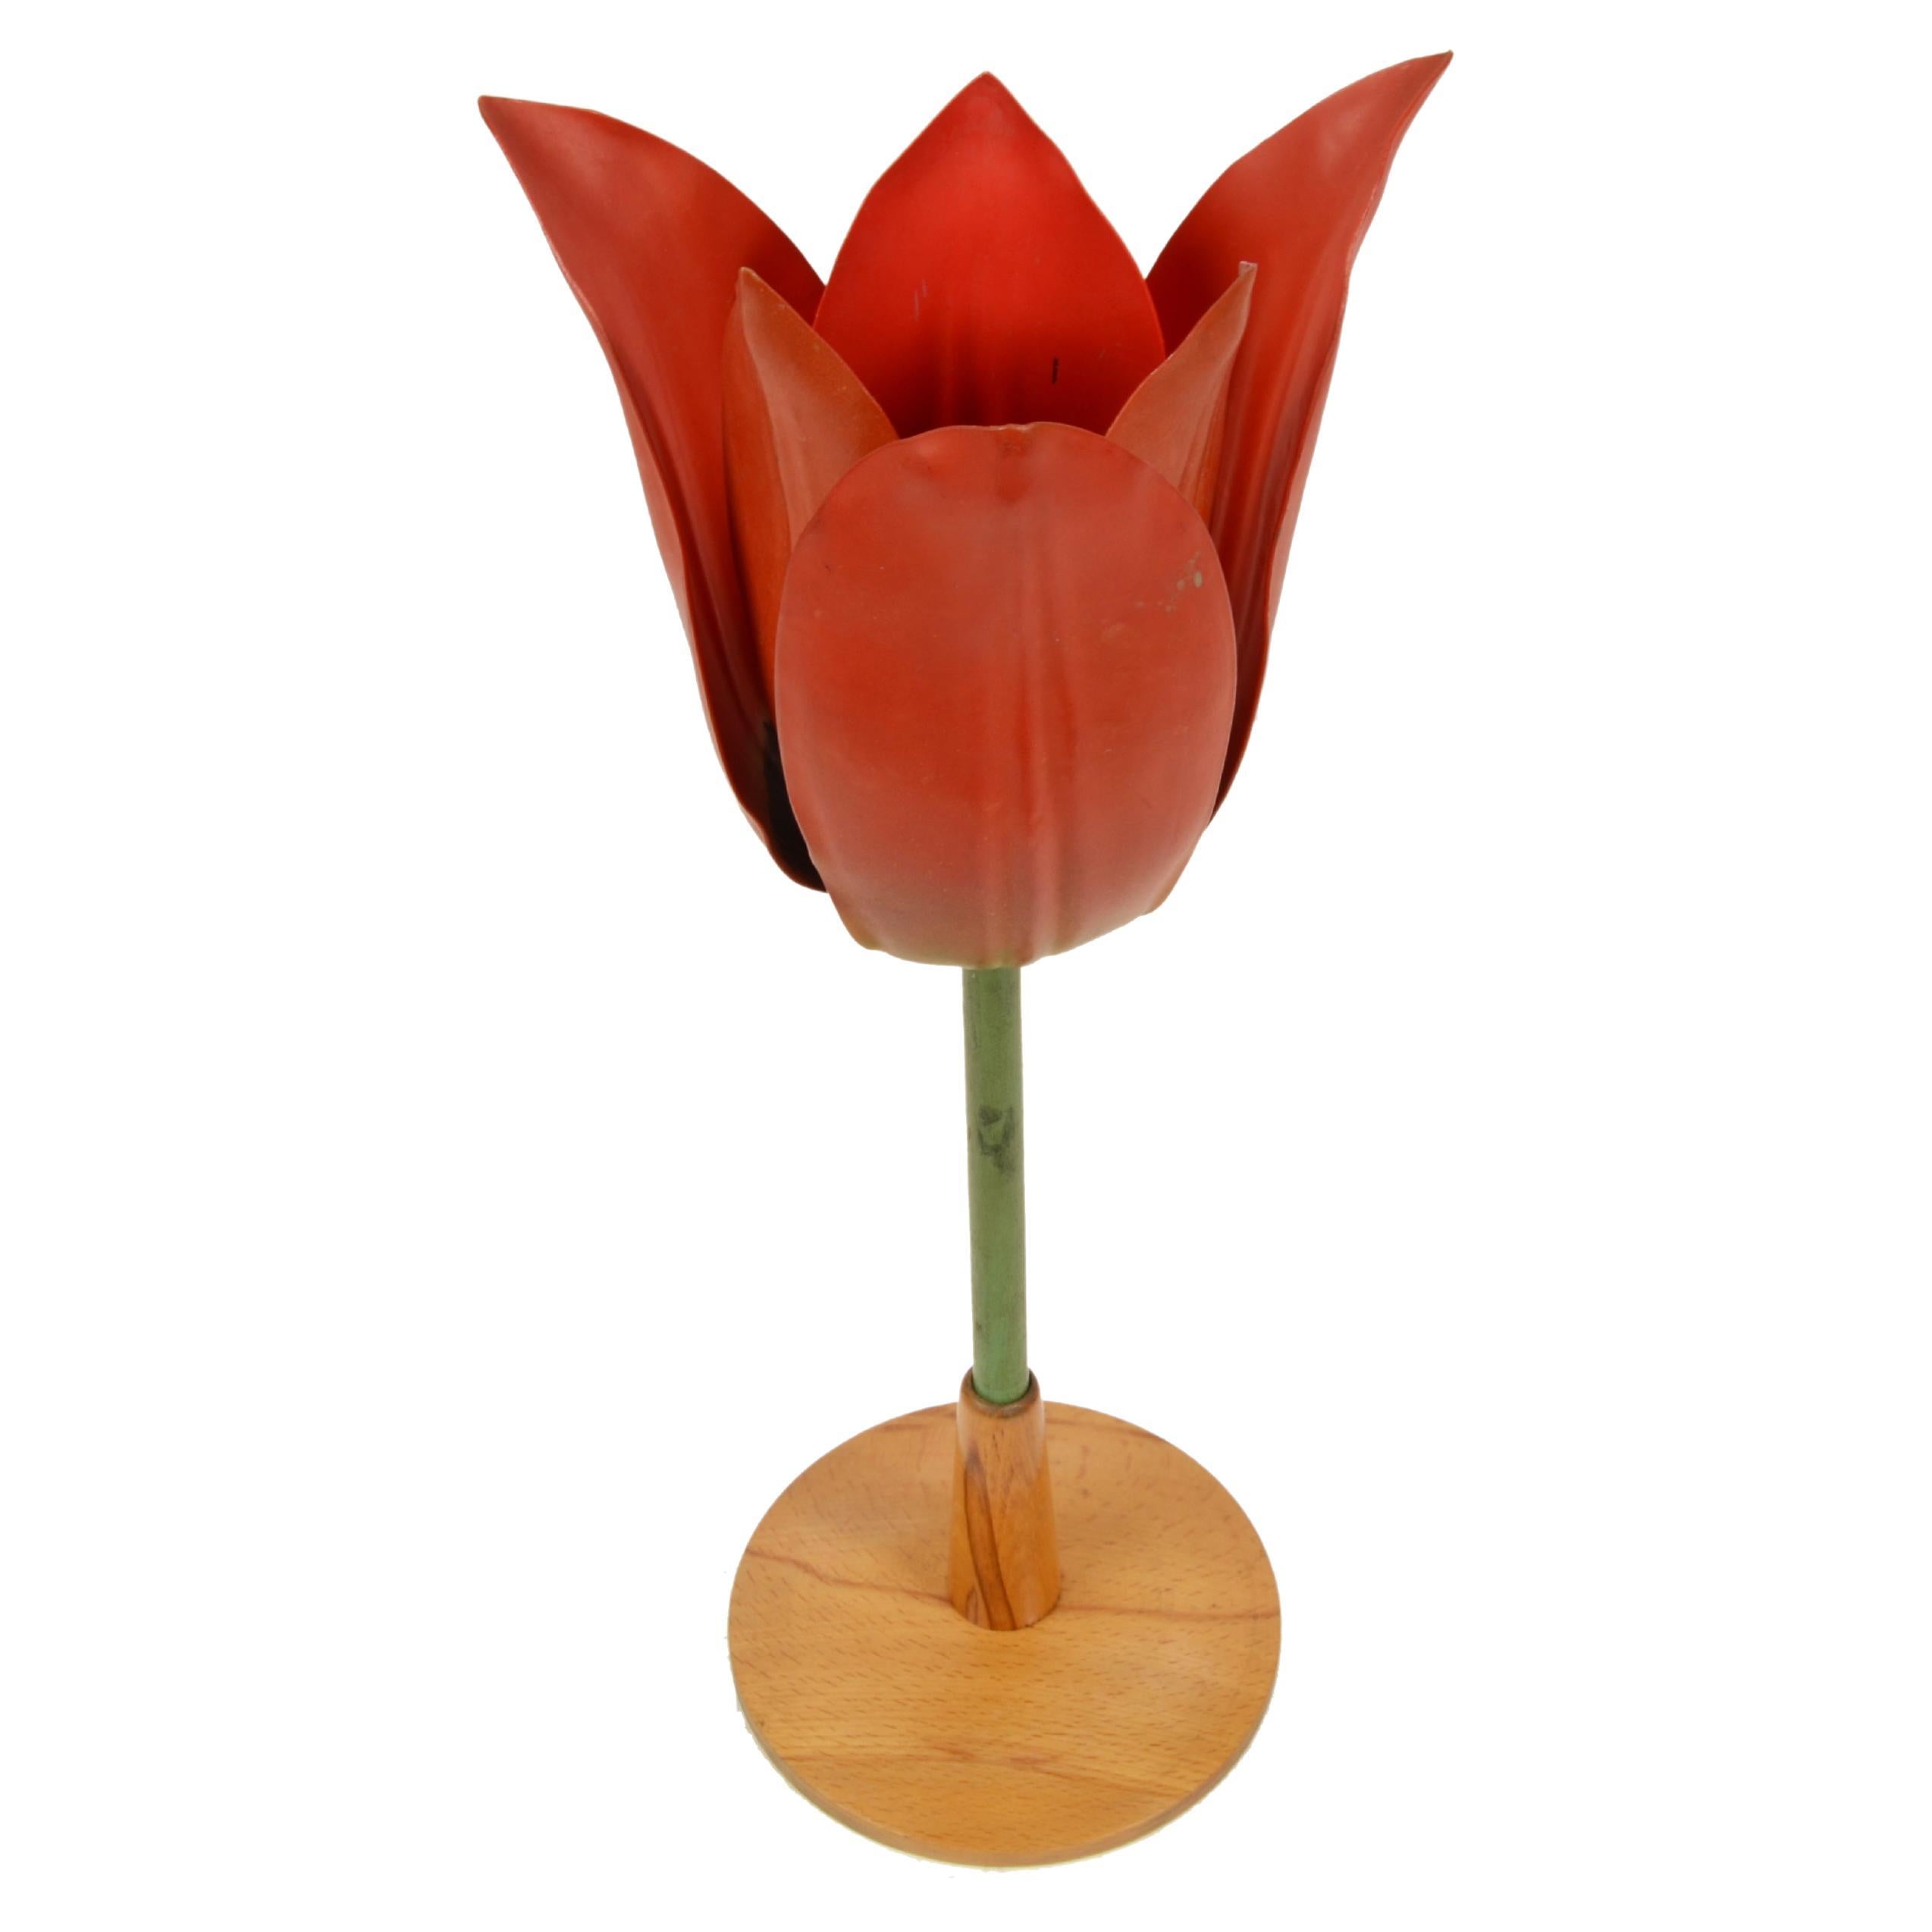 1950s Enlarged Didactic German Botanic Model Depicting a Poppy Flower